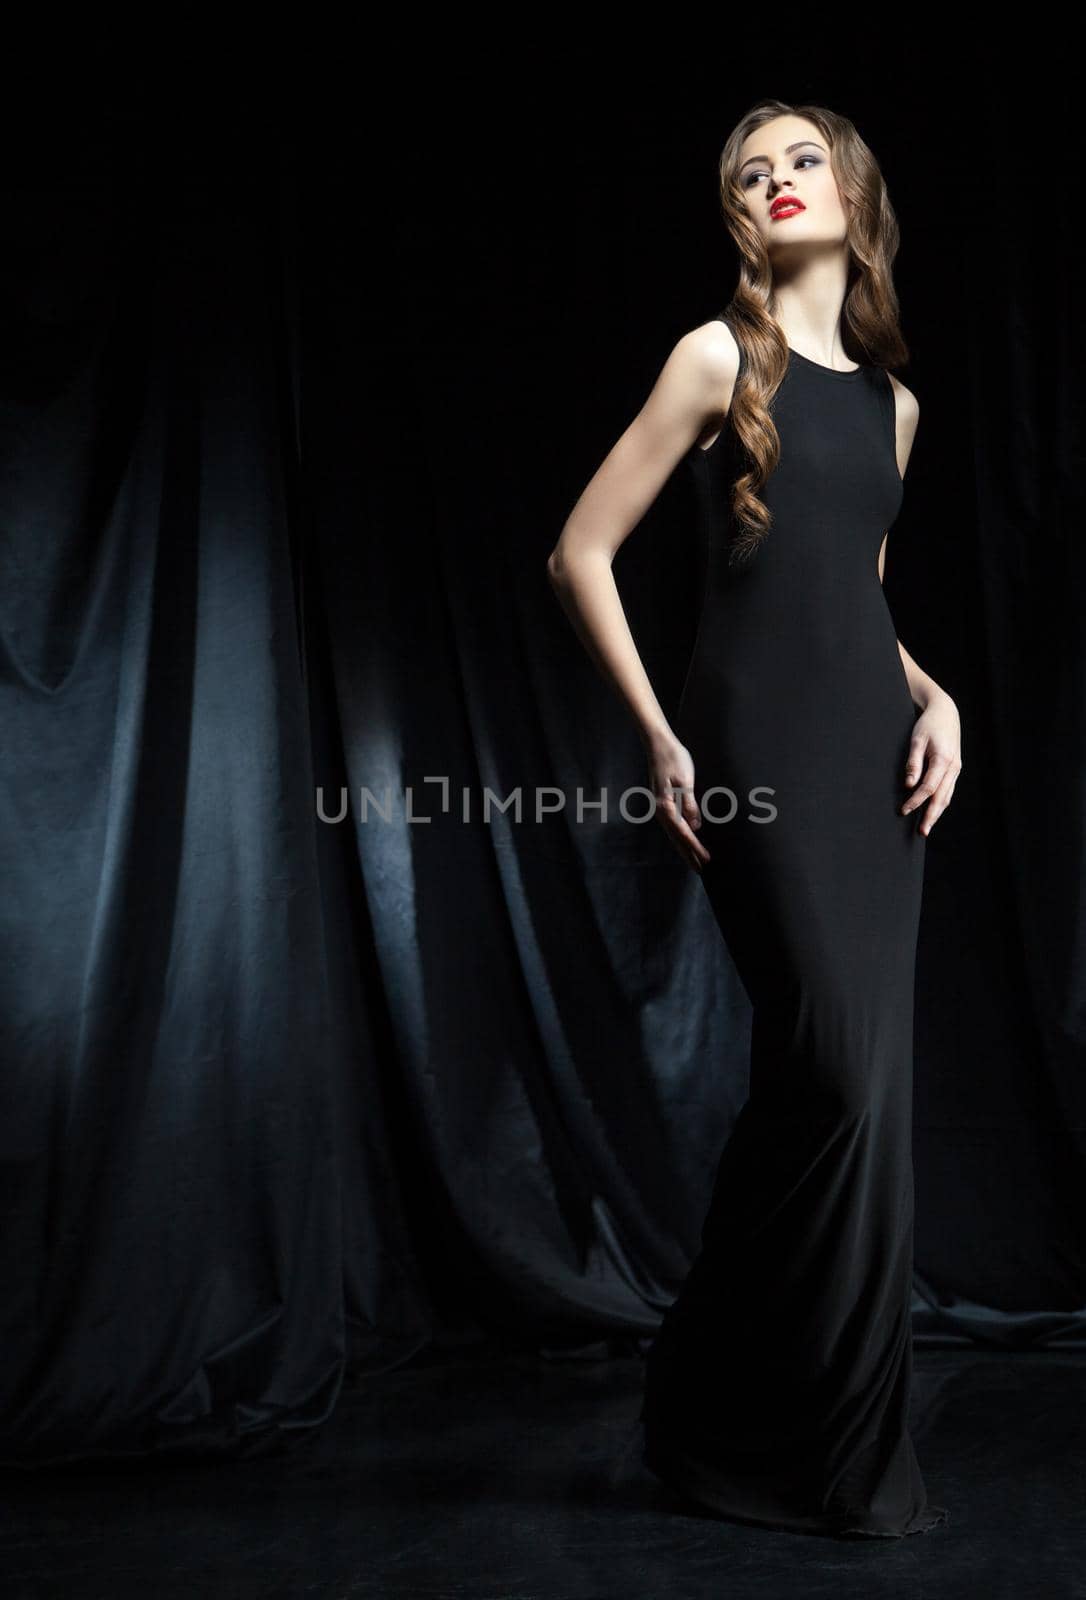 Portrait of young beautiful woman with long wavy hair in black dress posing against of black cloth